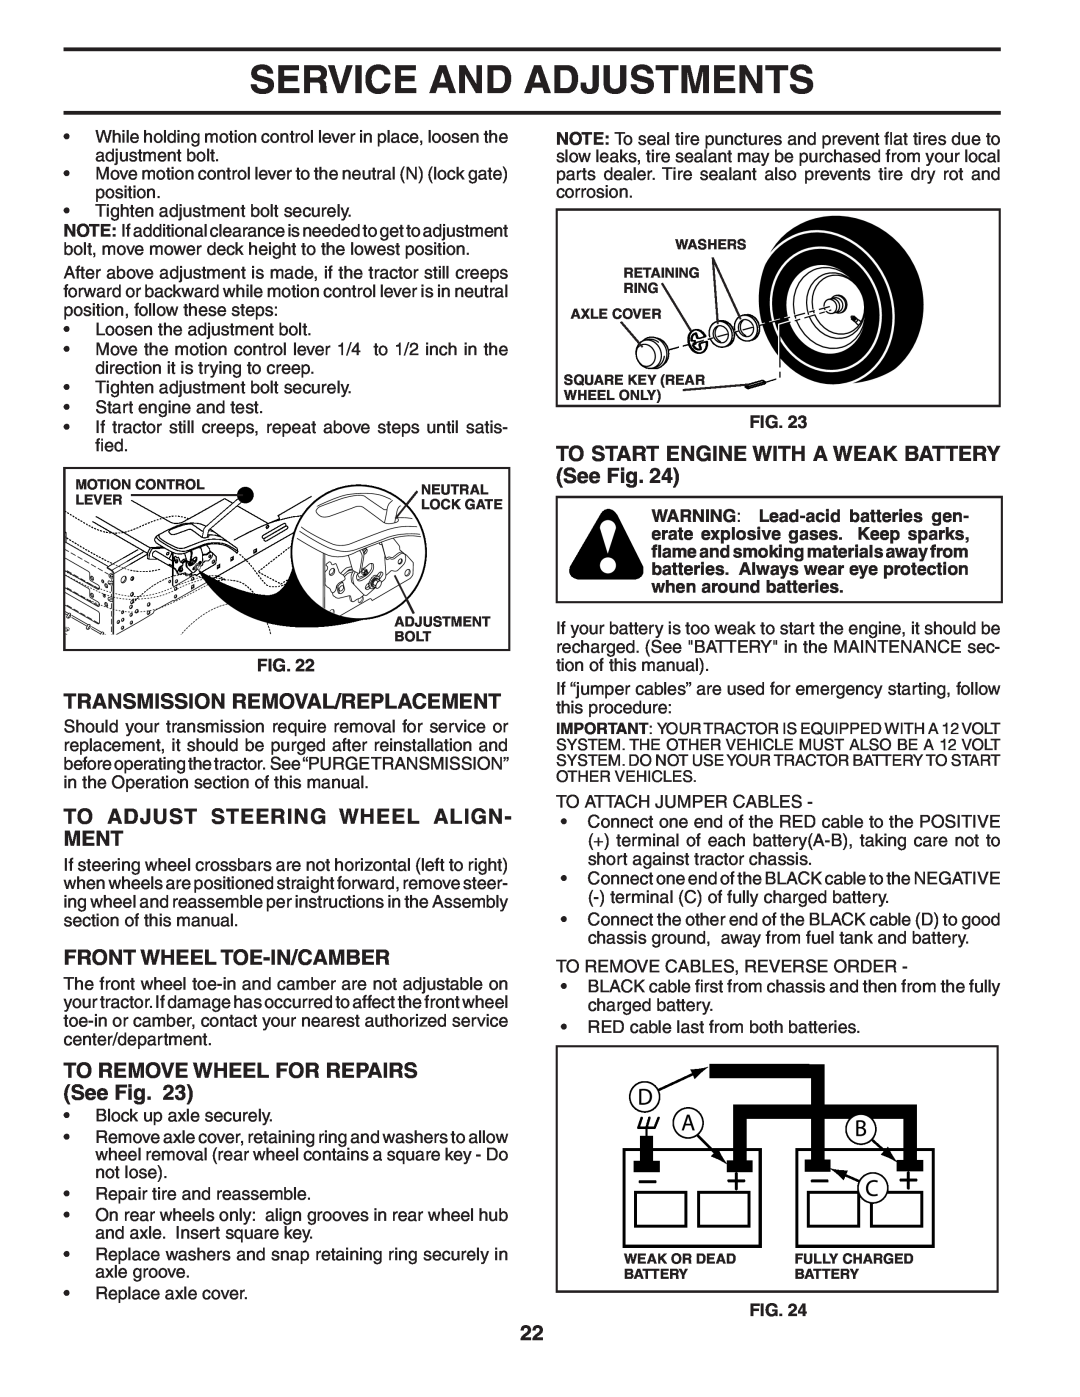 Poulan HD20H42 manual Transmission Removal/Replacement, To Adjust Steering Wheel Align- Ment, Front Wheel Toe-In/Camber 